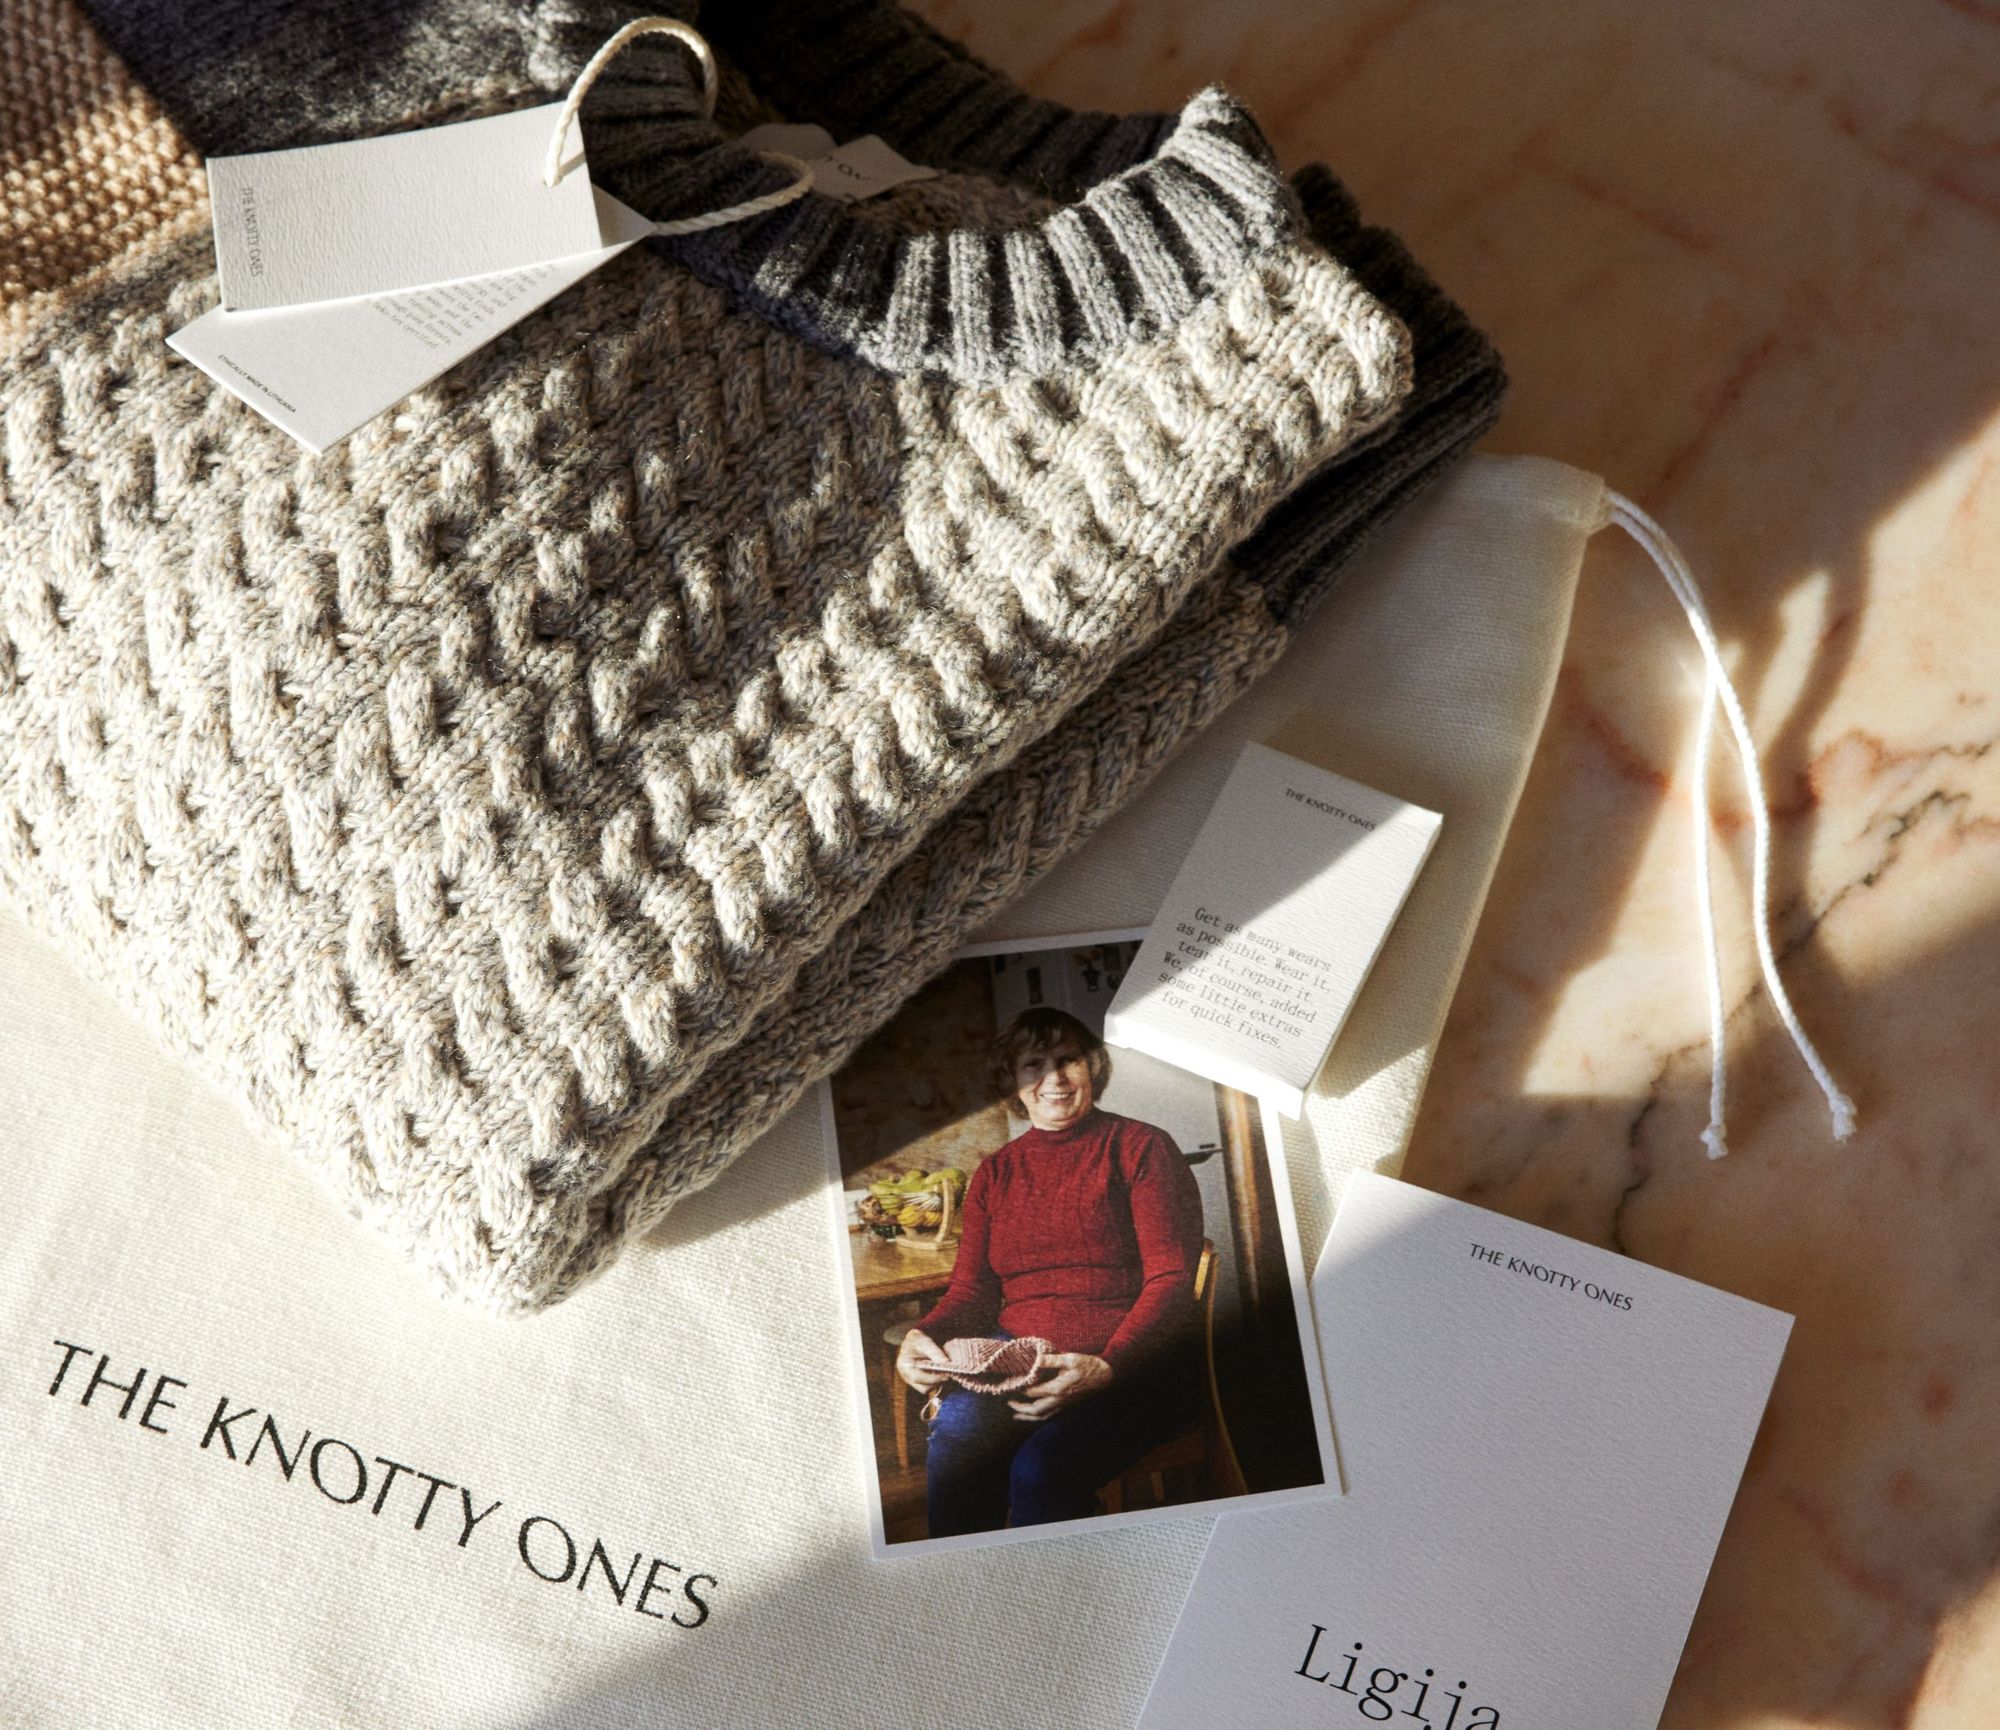 Lithuanian women and sustainable fashion—we quickly took The Knotty Ones into our hearts